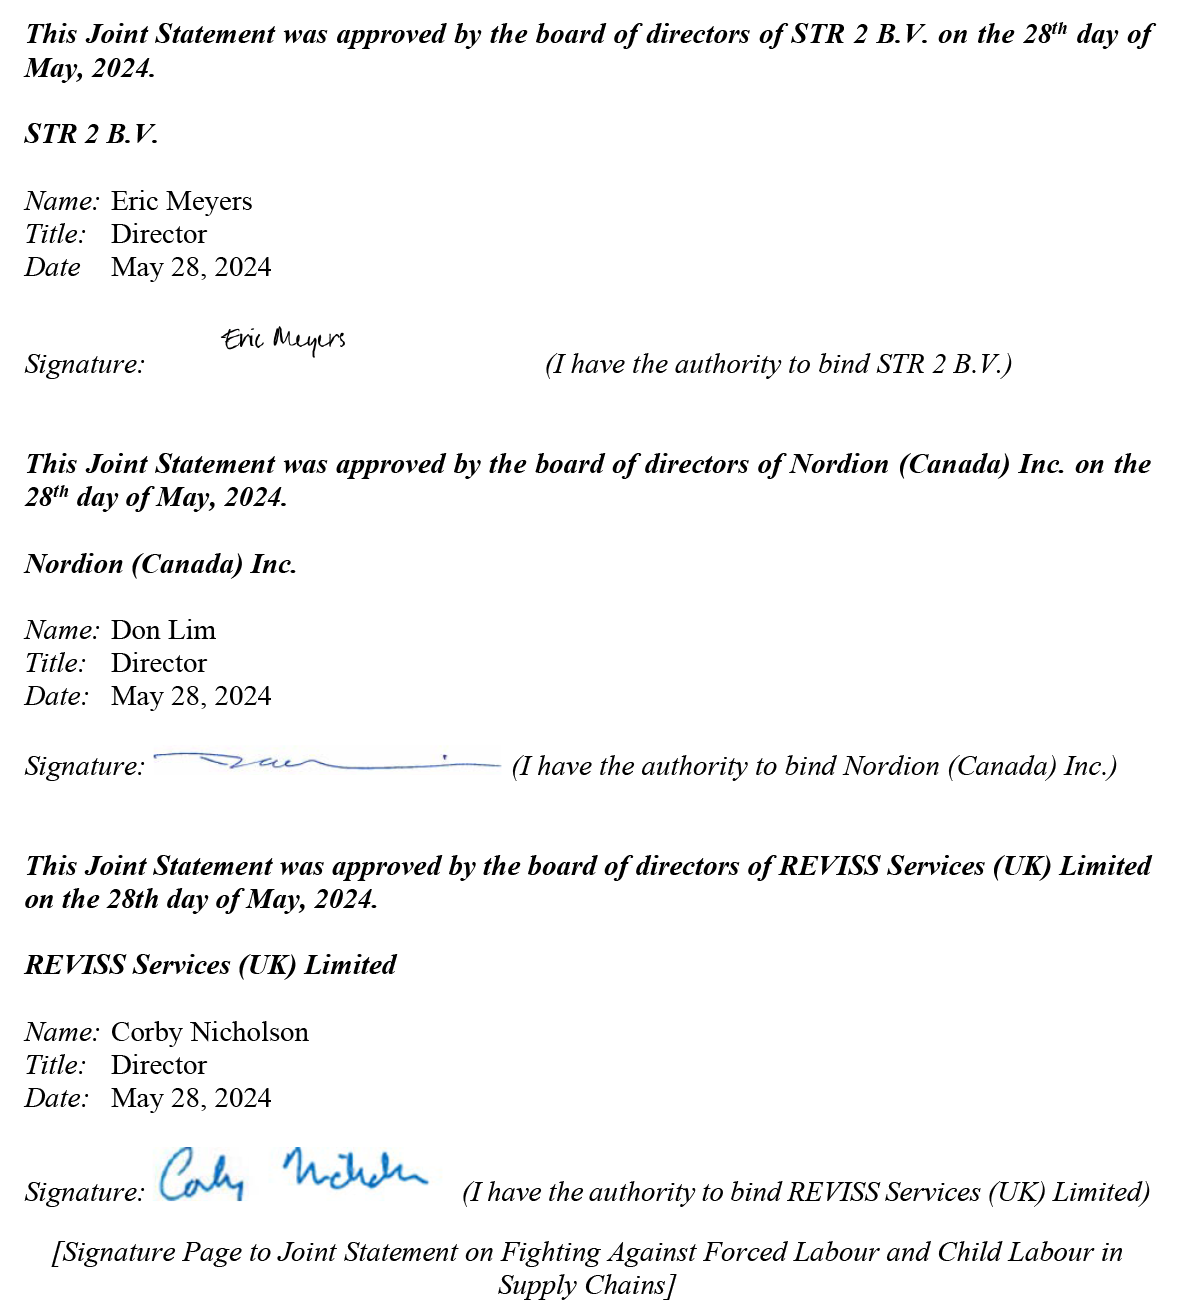 An image showing the signatures of Director Eric Meyers, on behalf of STR 2 B.V., Director Don Lim on behalf of Nordion Canada Inc, and Director Corby Nicholson on behalf of REVISS Services UK Ltd. dated May 28, 2024